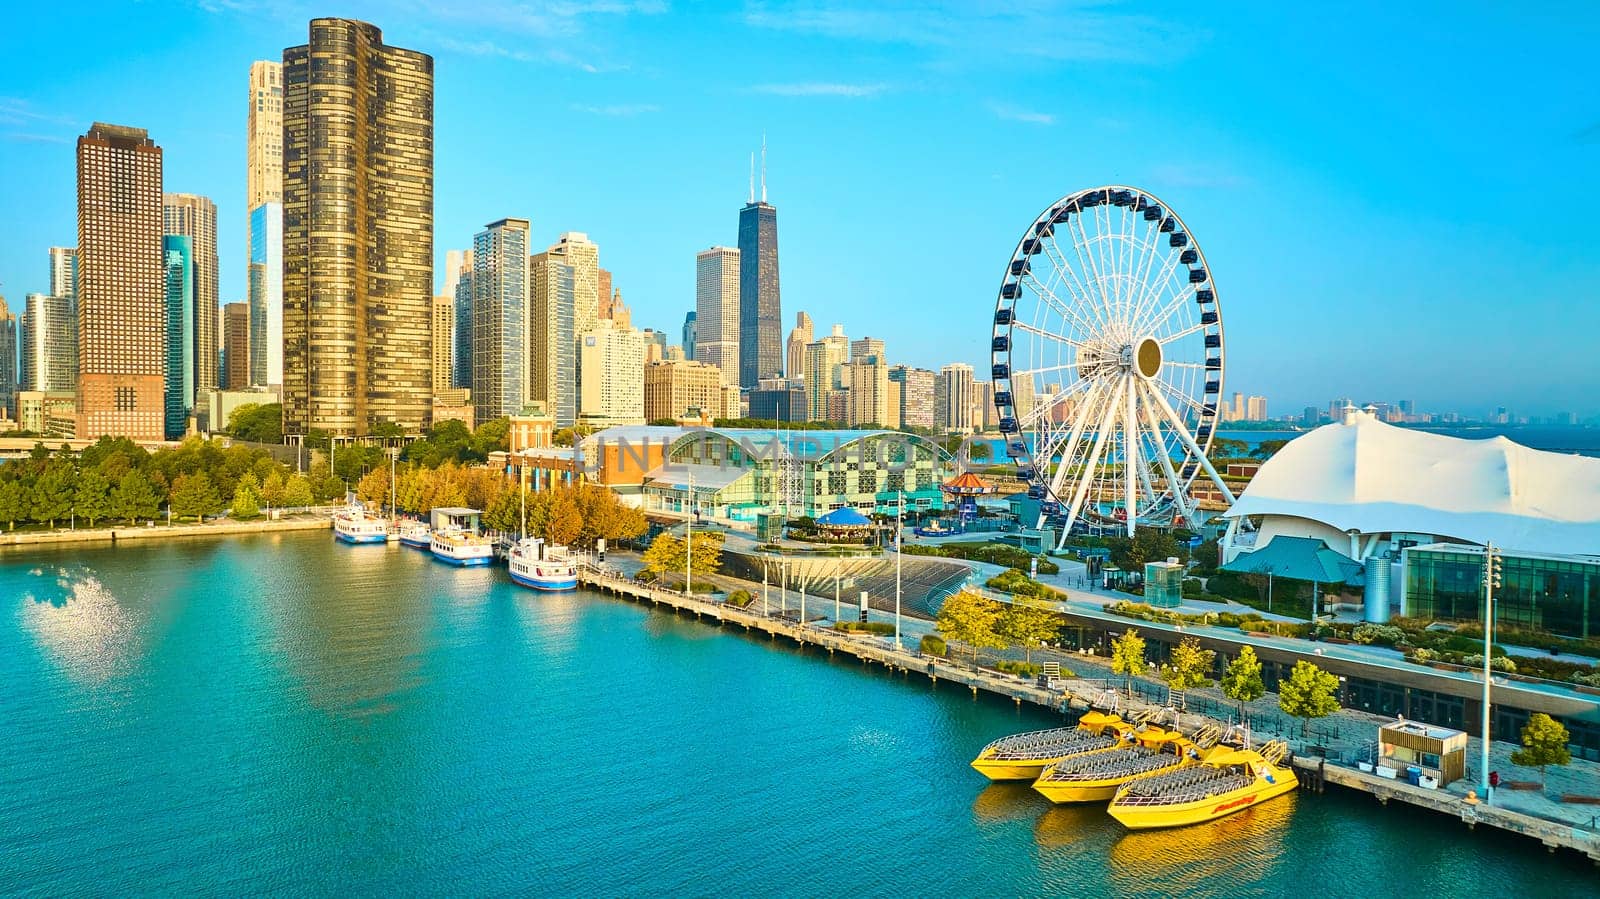 Image of Aerial Centennial Wheel on Navy Pier with Chicago, IL skyscrapers in summer at dawn